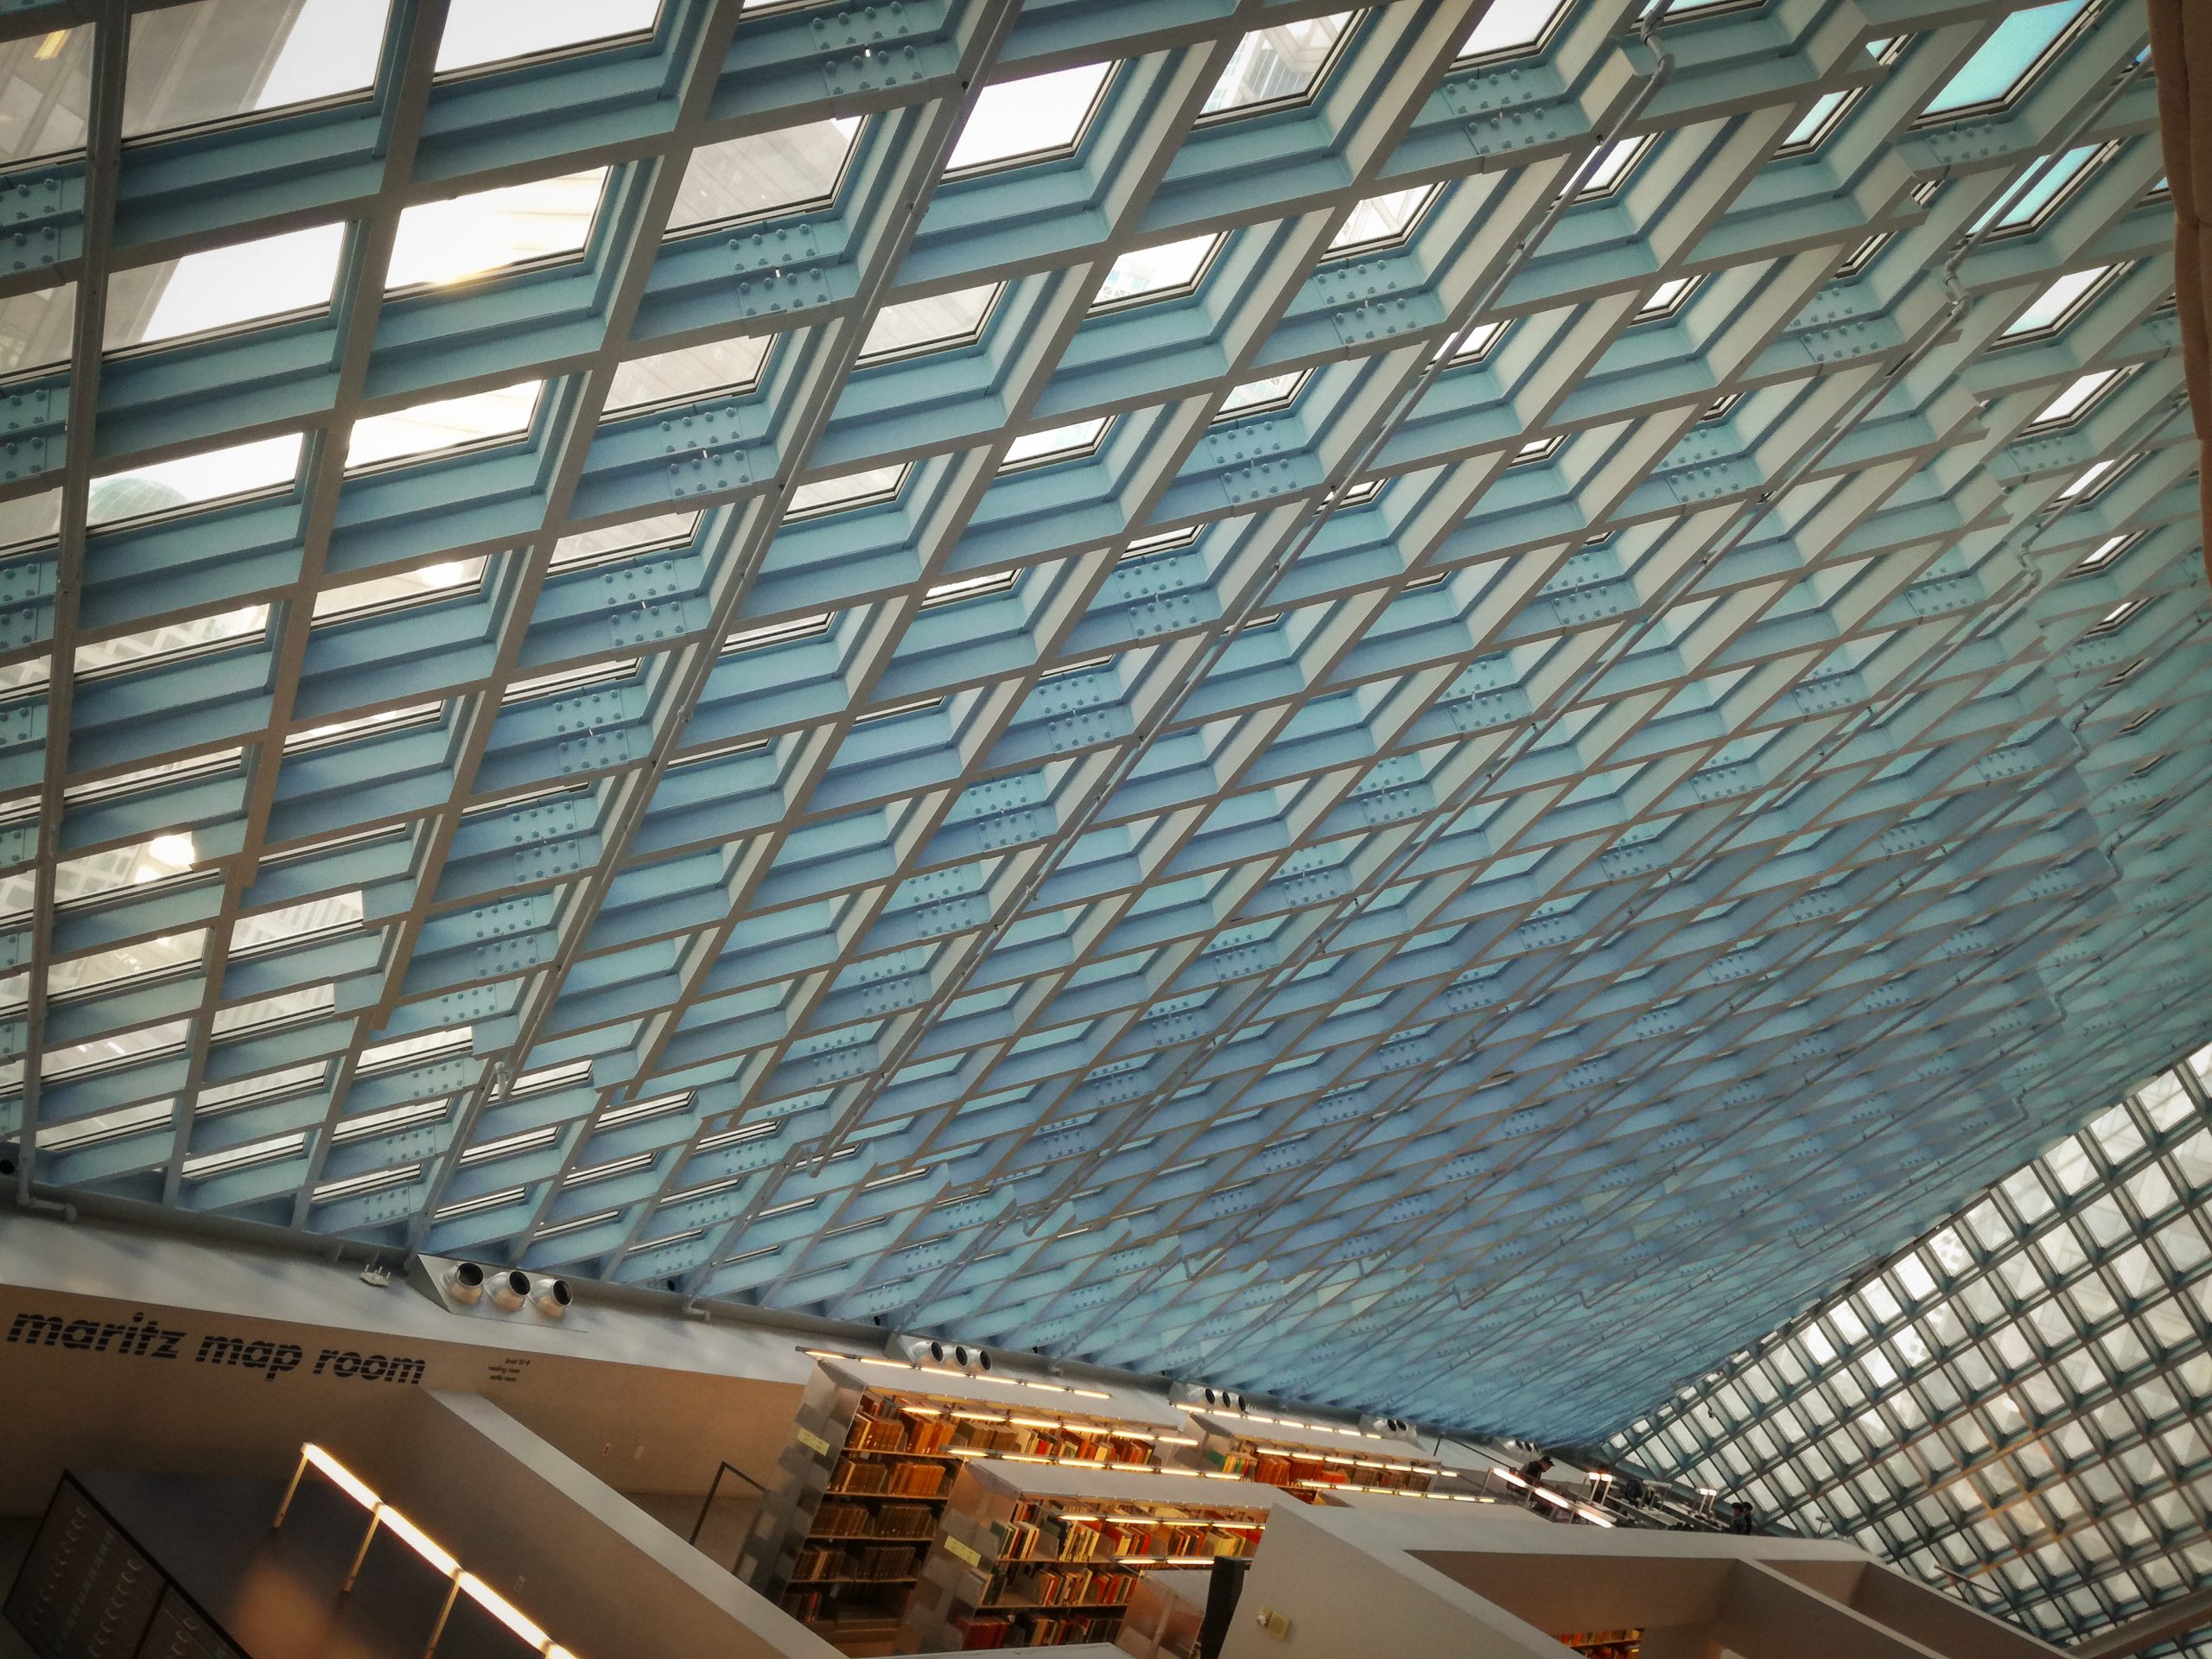 Ceiling of Seattle Central Library